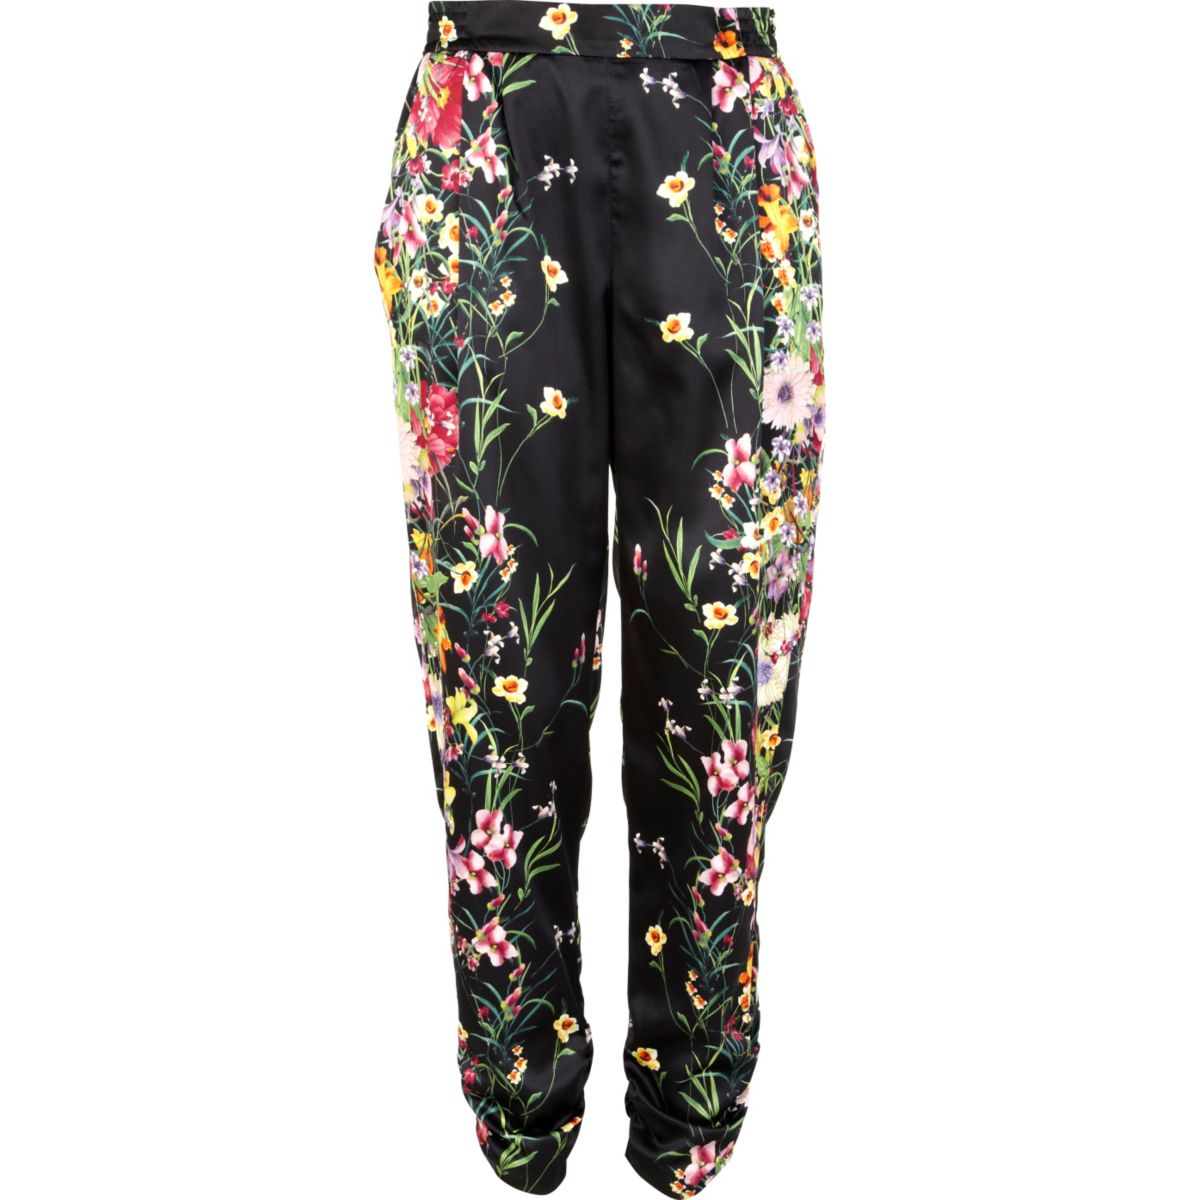 Black floral print ruched tapered trousers - Trousers - Sale - women